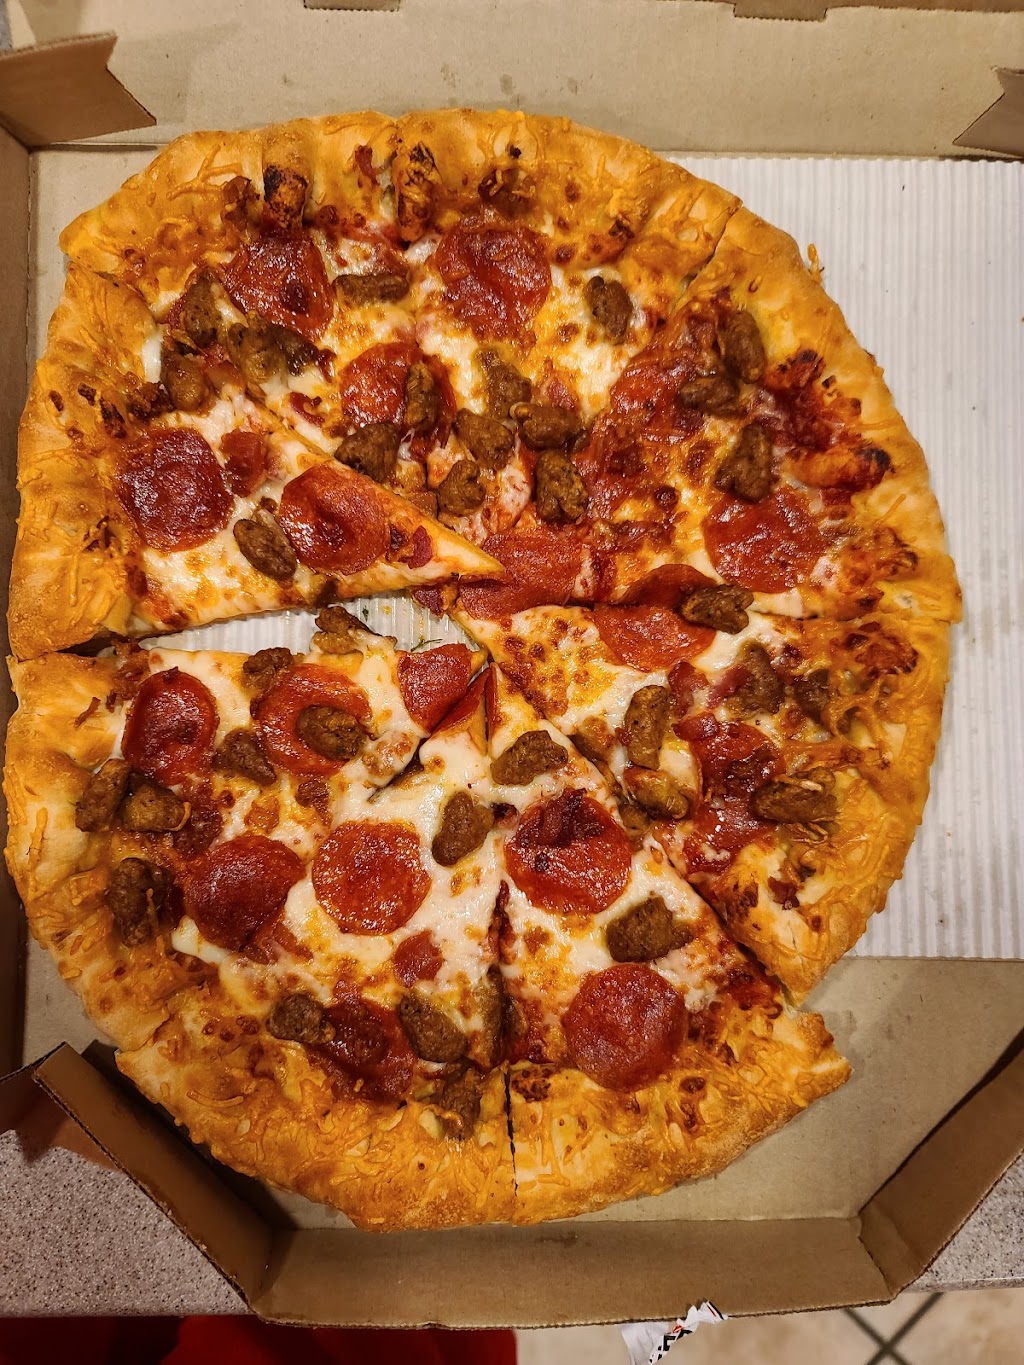 Pizza Hut | meal delivery | 792 S 3000 E #103, St. George, UT 84790, USA | 4352519656 OR +1 435-251-9656